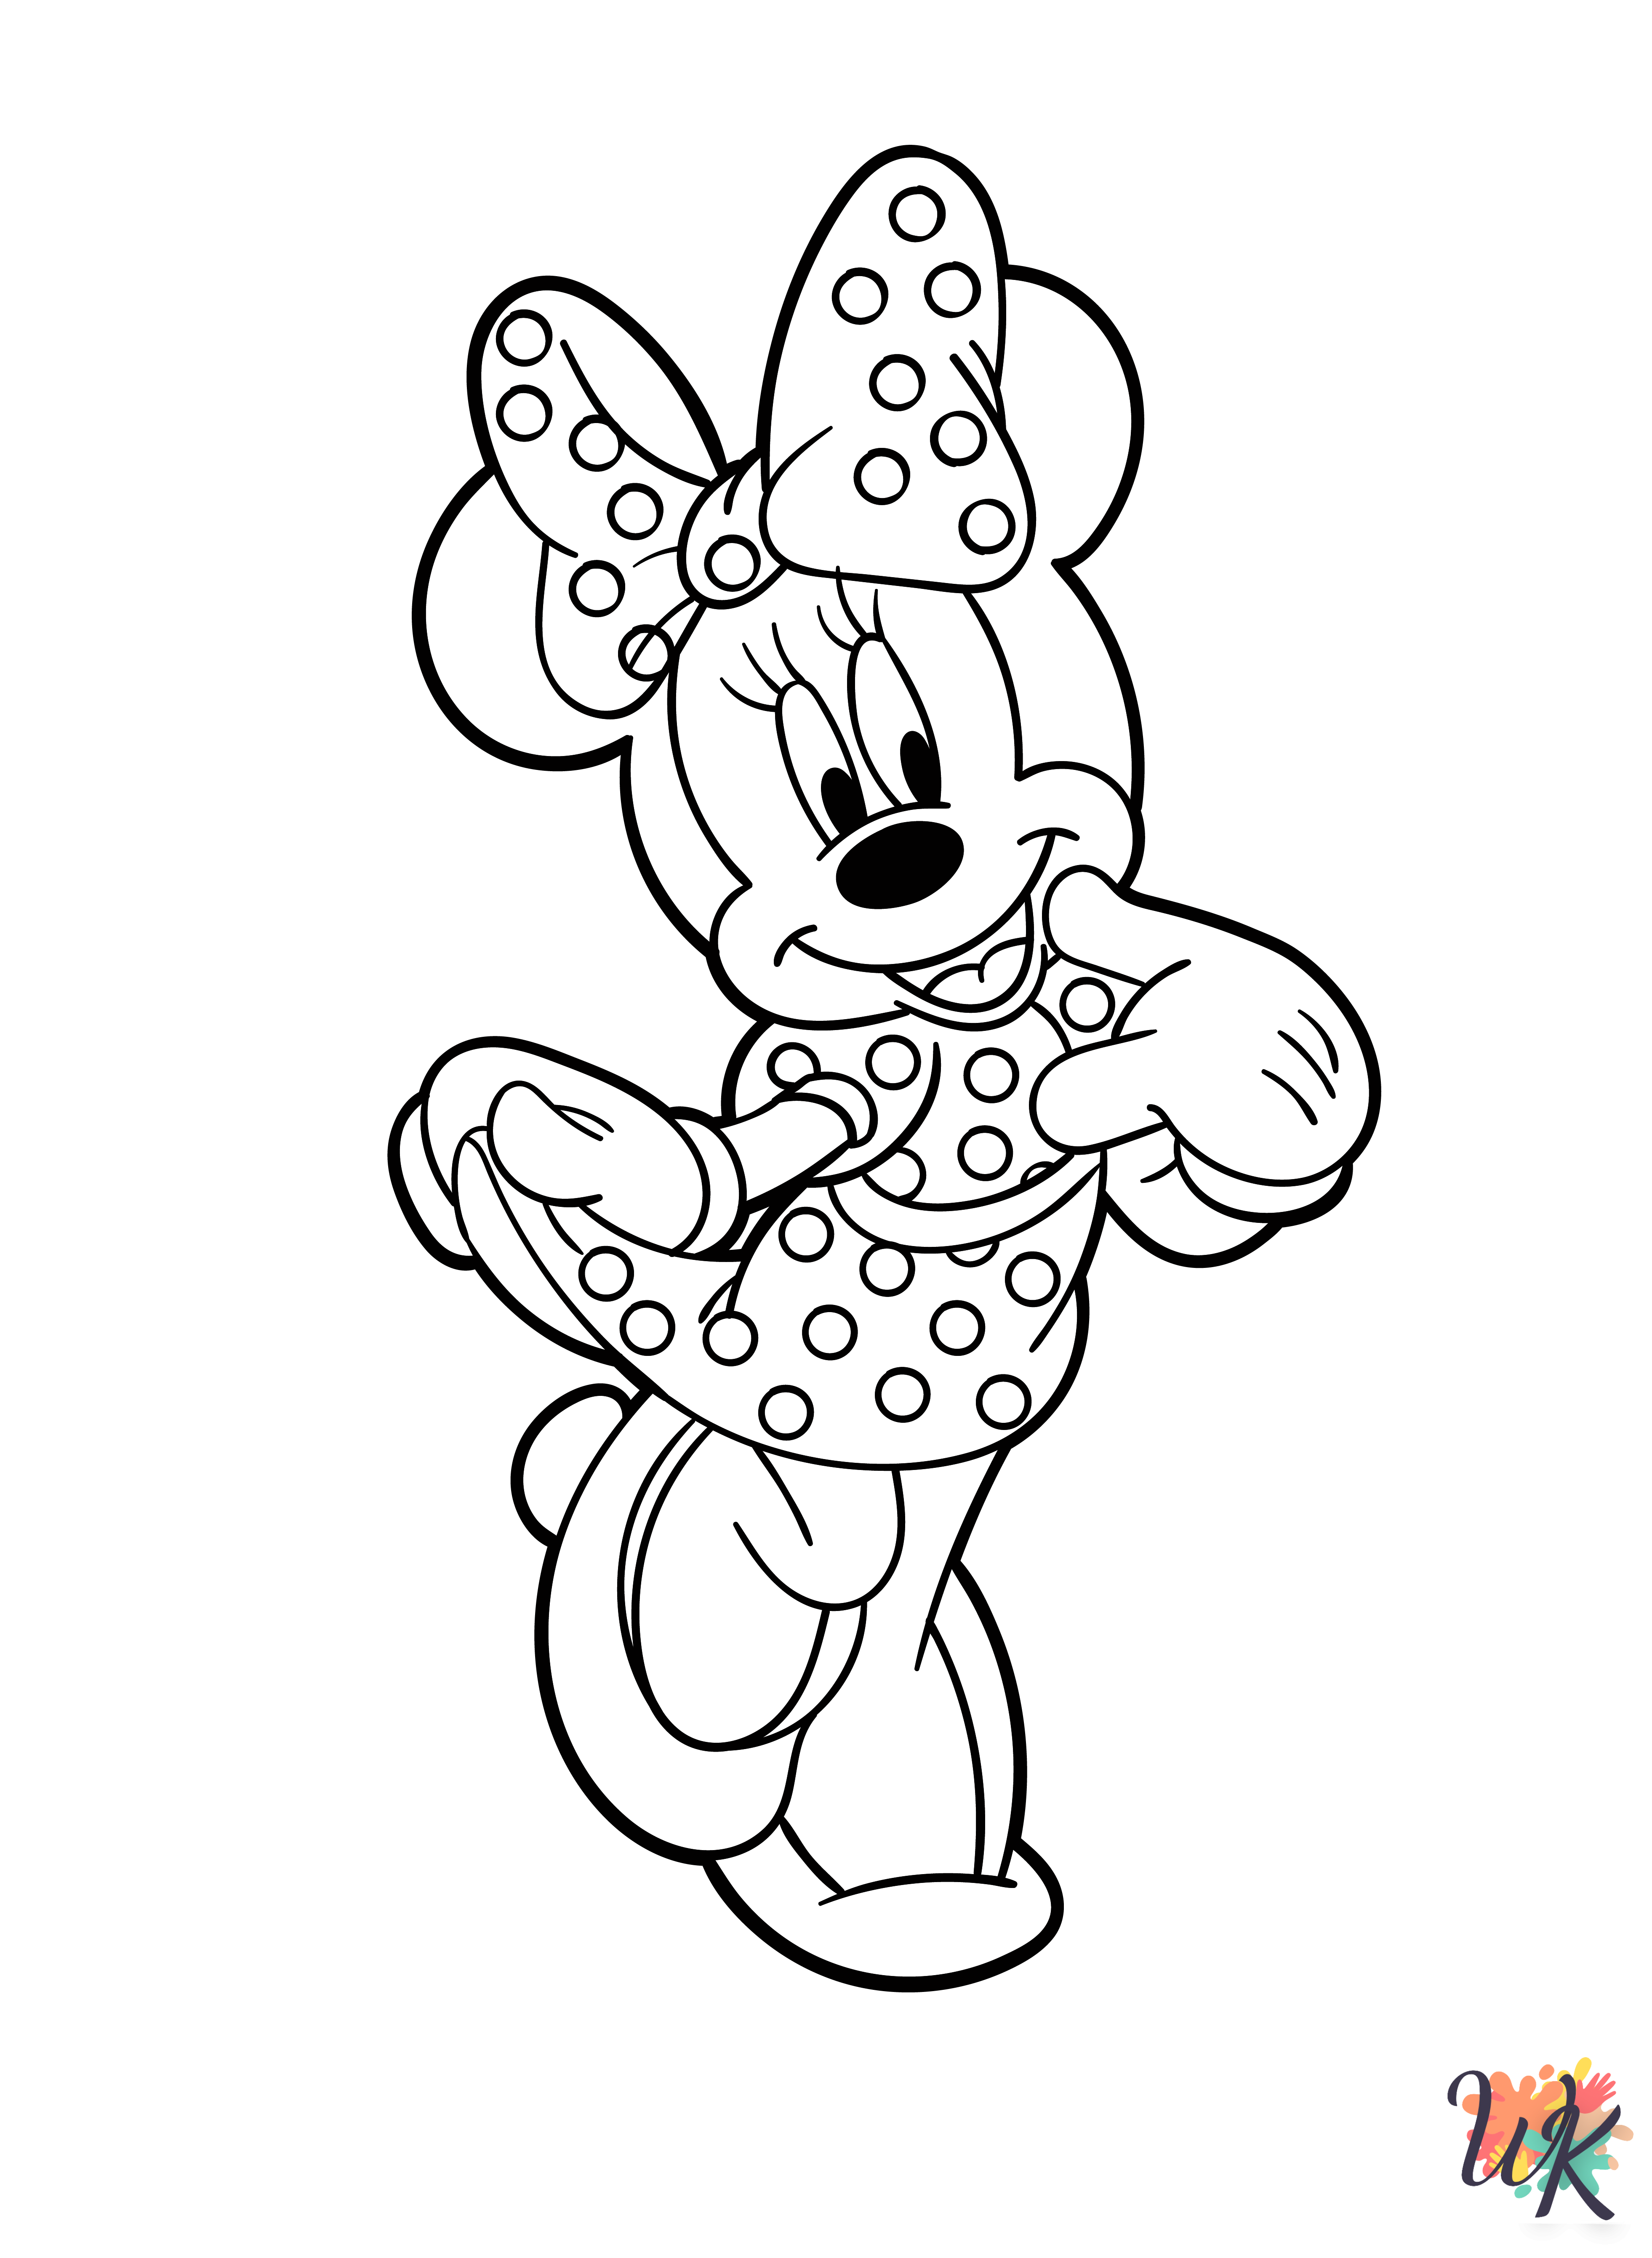 fun Minnie Mouse coloring pages